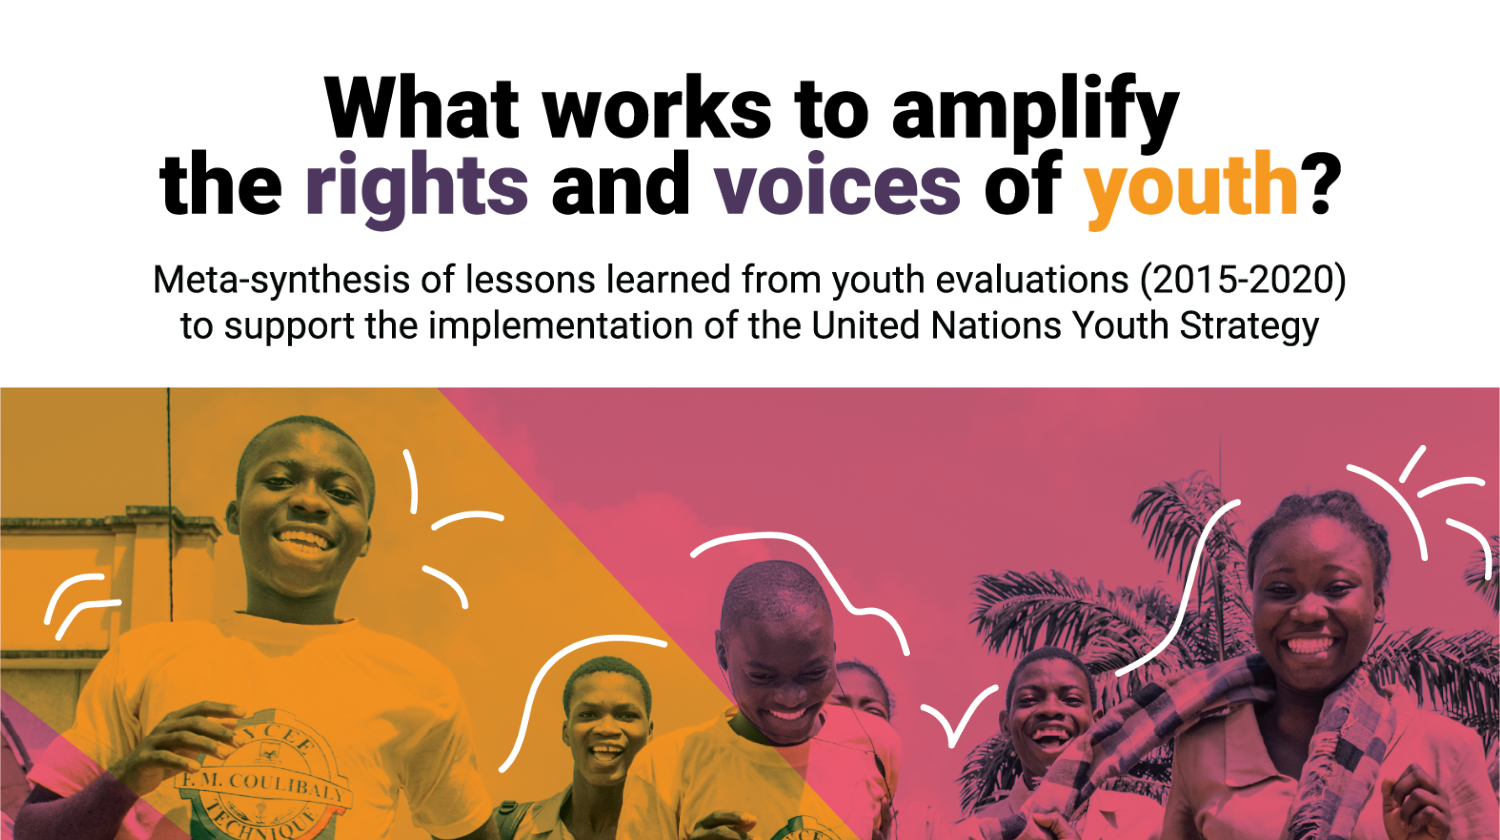 What works to amplify the rights and voices of youth?